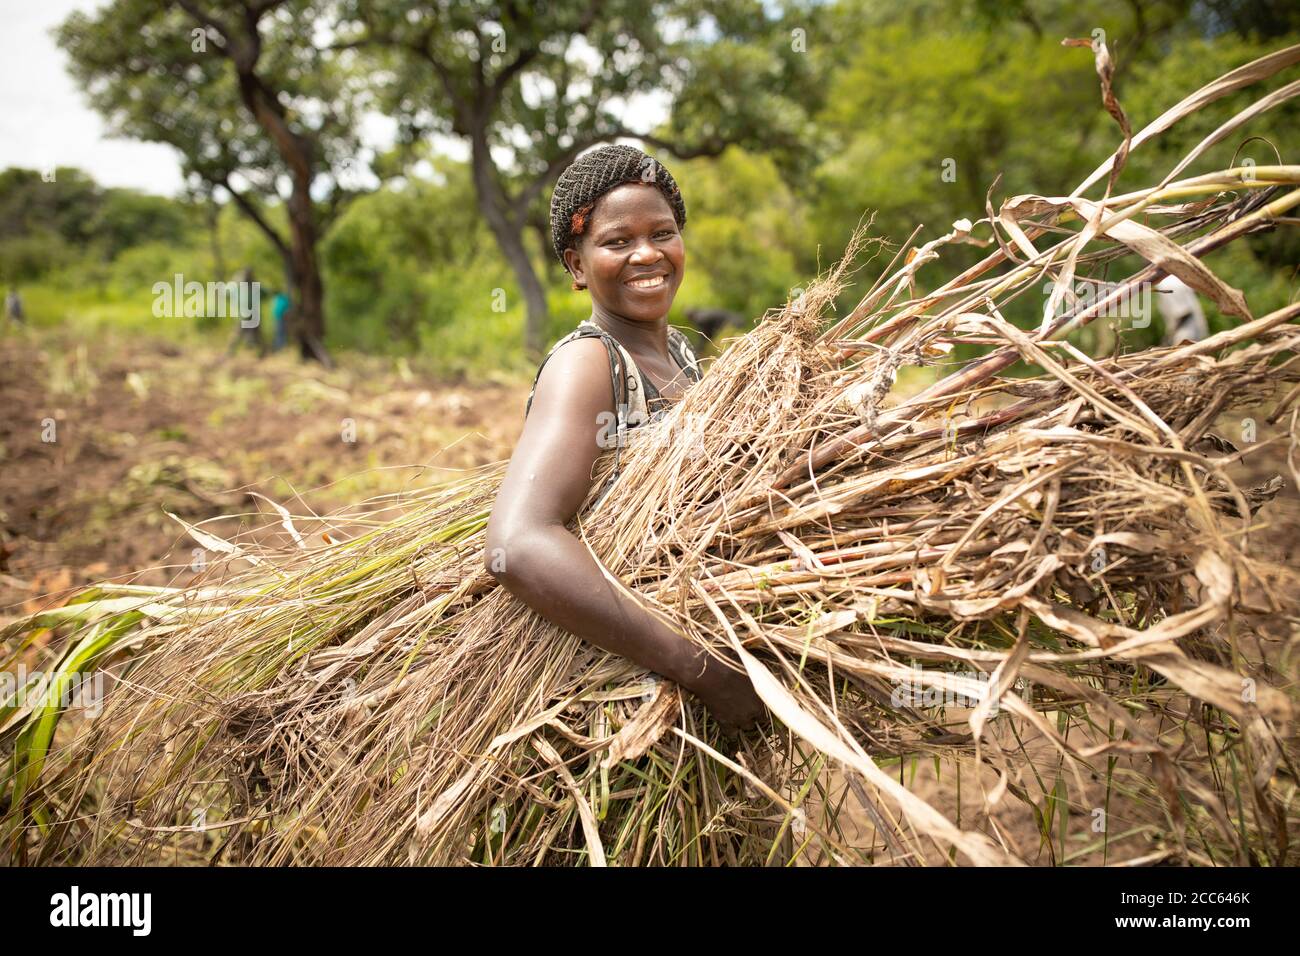 A refugee from South Sudan clears land for farming in a field outside Palabek Refugee Settlement in northern Uganda, East Africa. Stock Photo